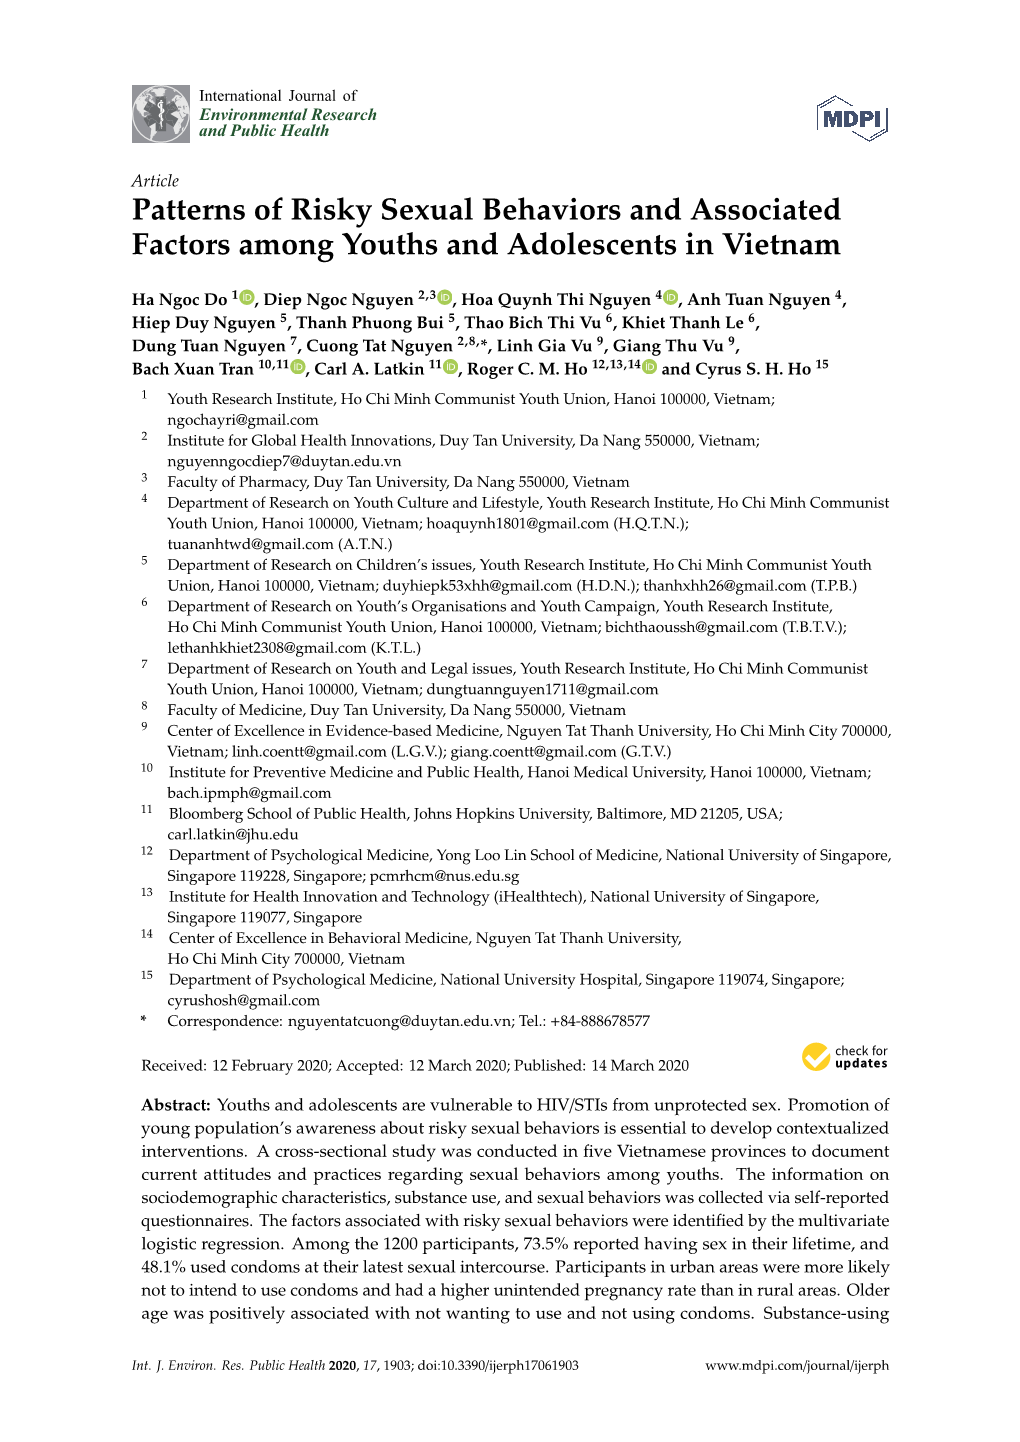 Patterns of Risky Sexual Behaviors and Associated Factors Among Youths and Adolescents in Vietnam